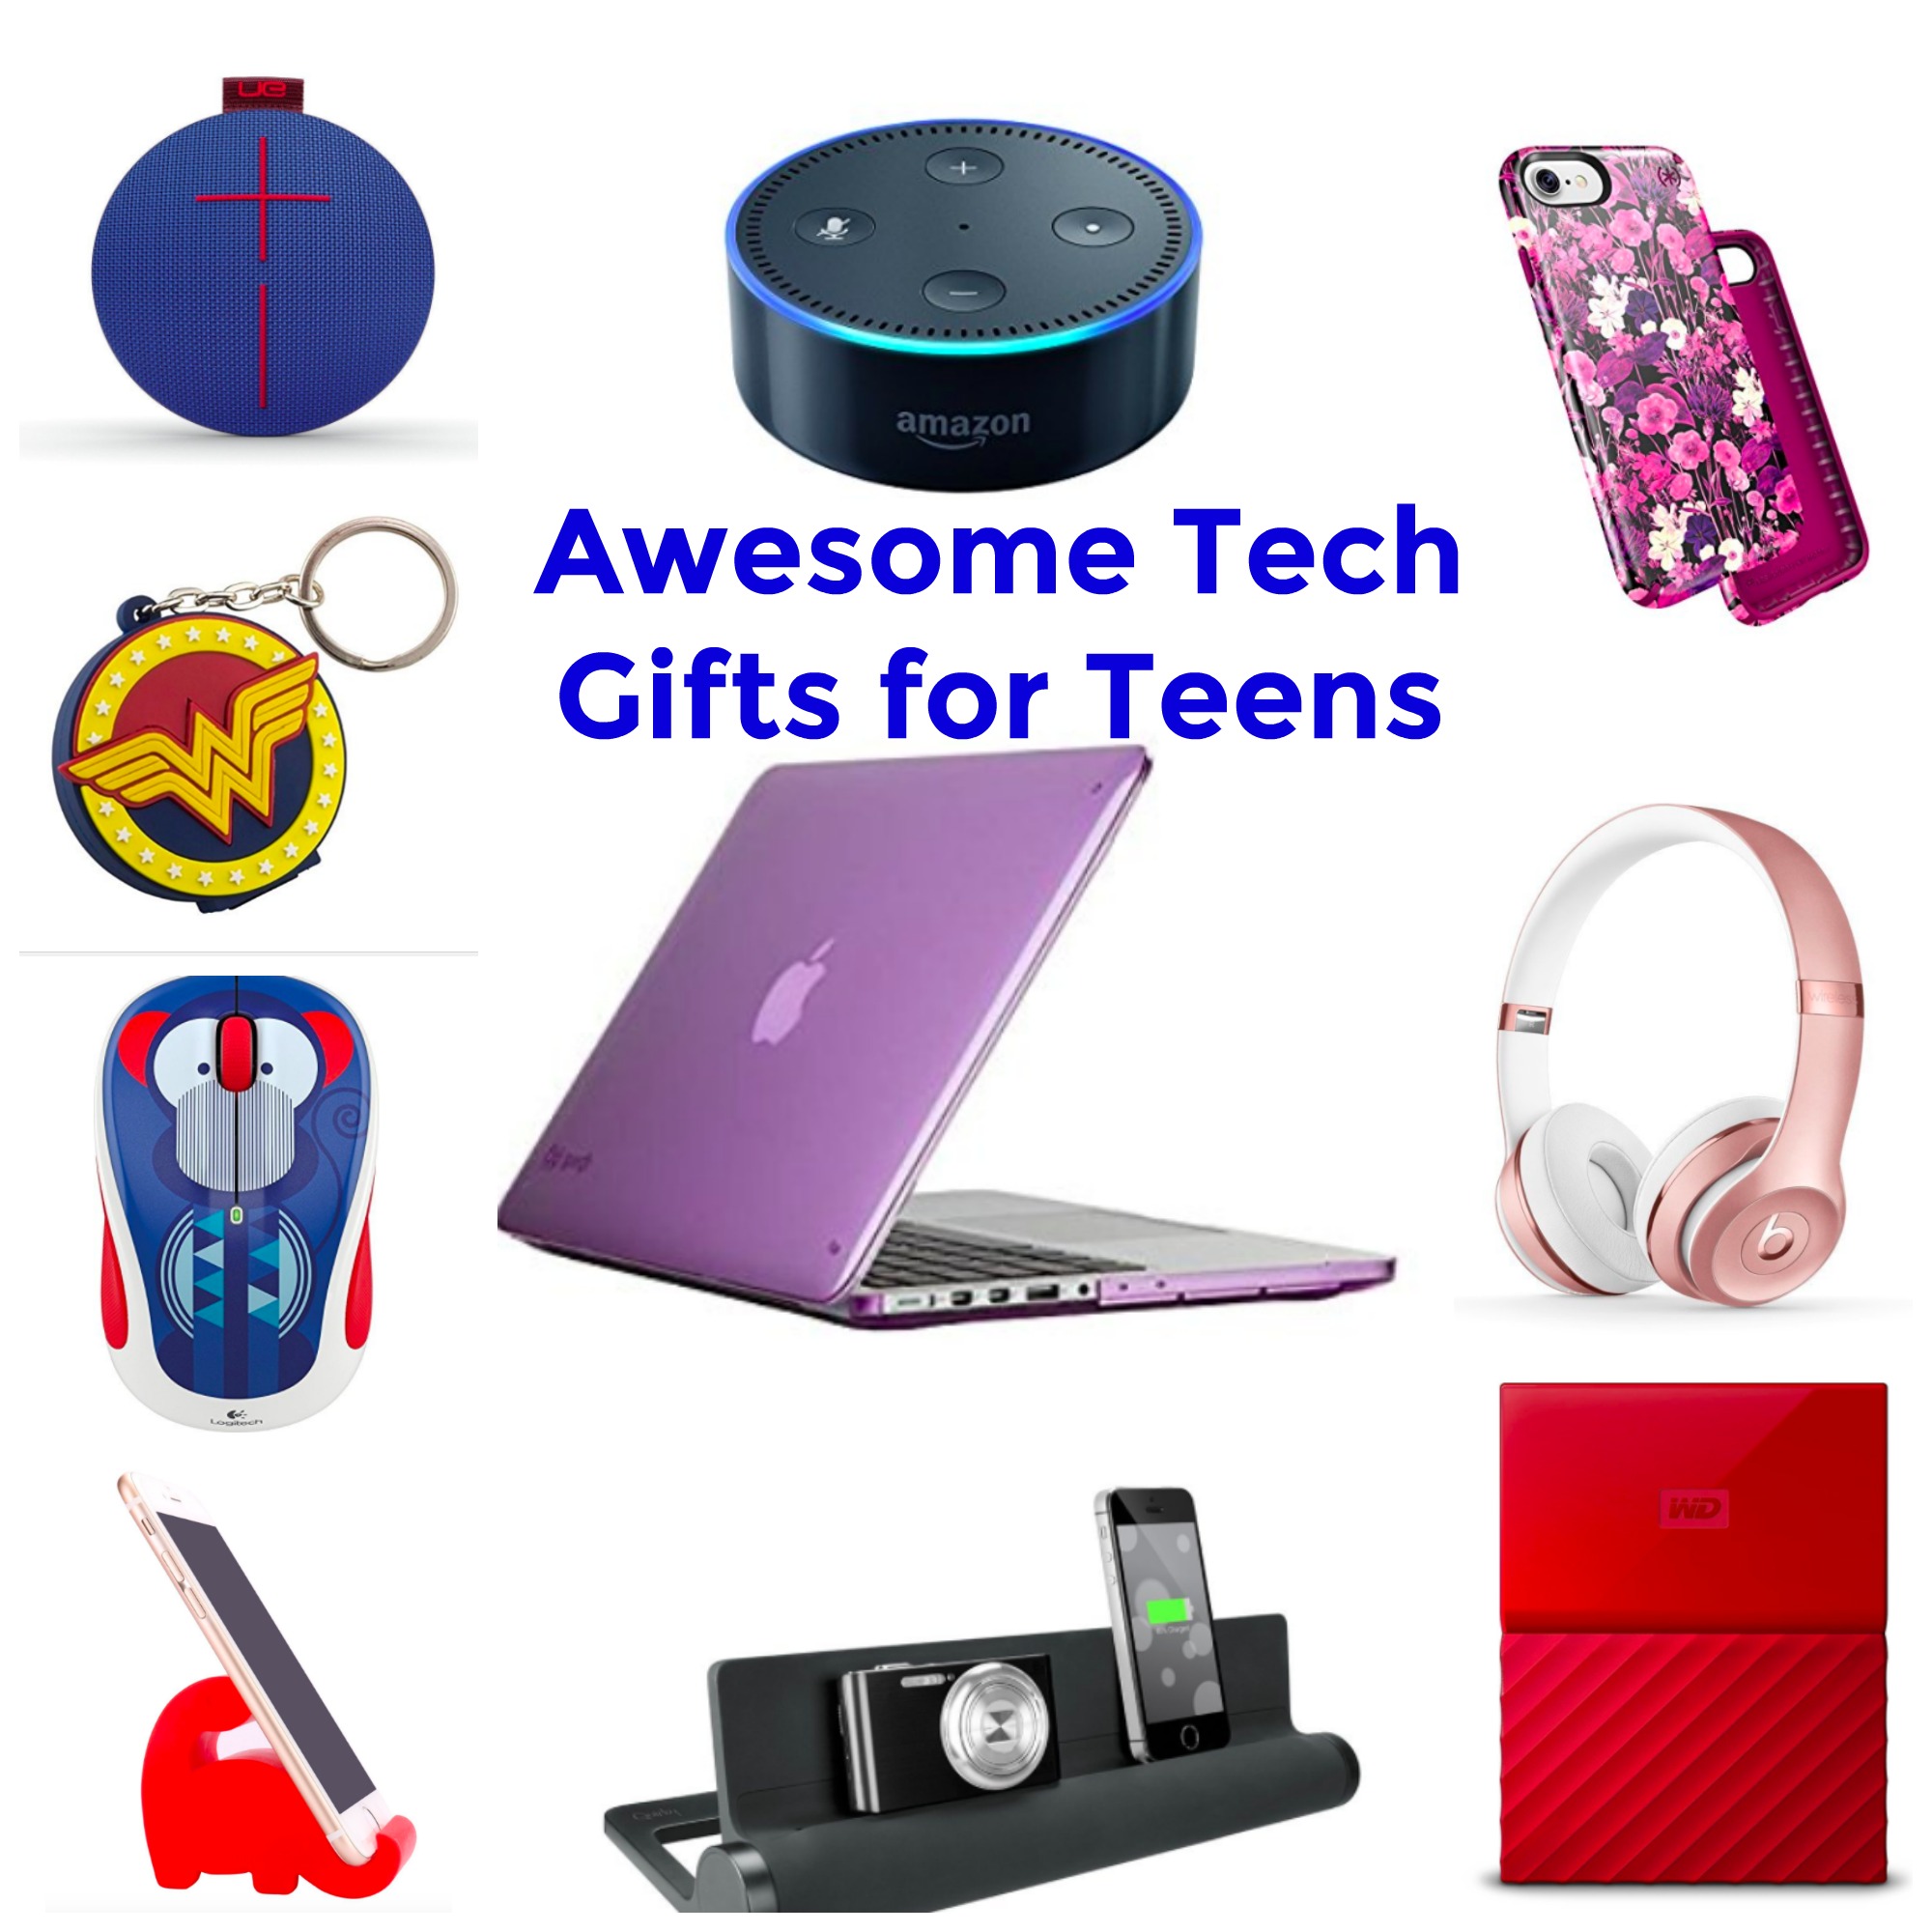 Top Ten Best Tech Gifts for Teens NYC Single Mom